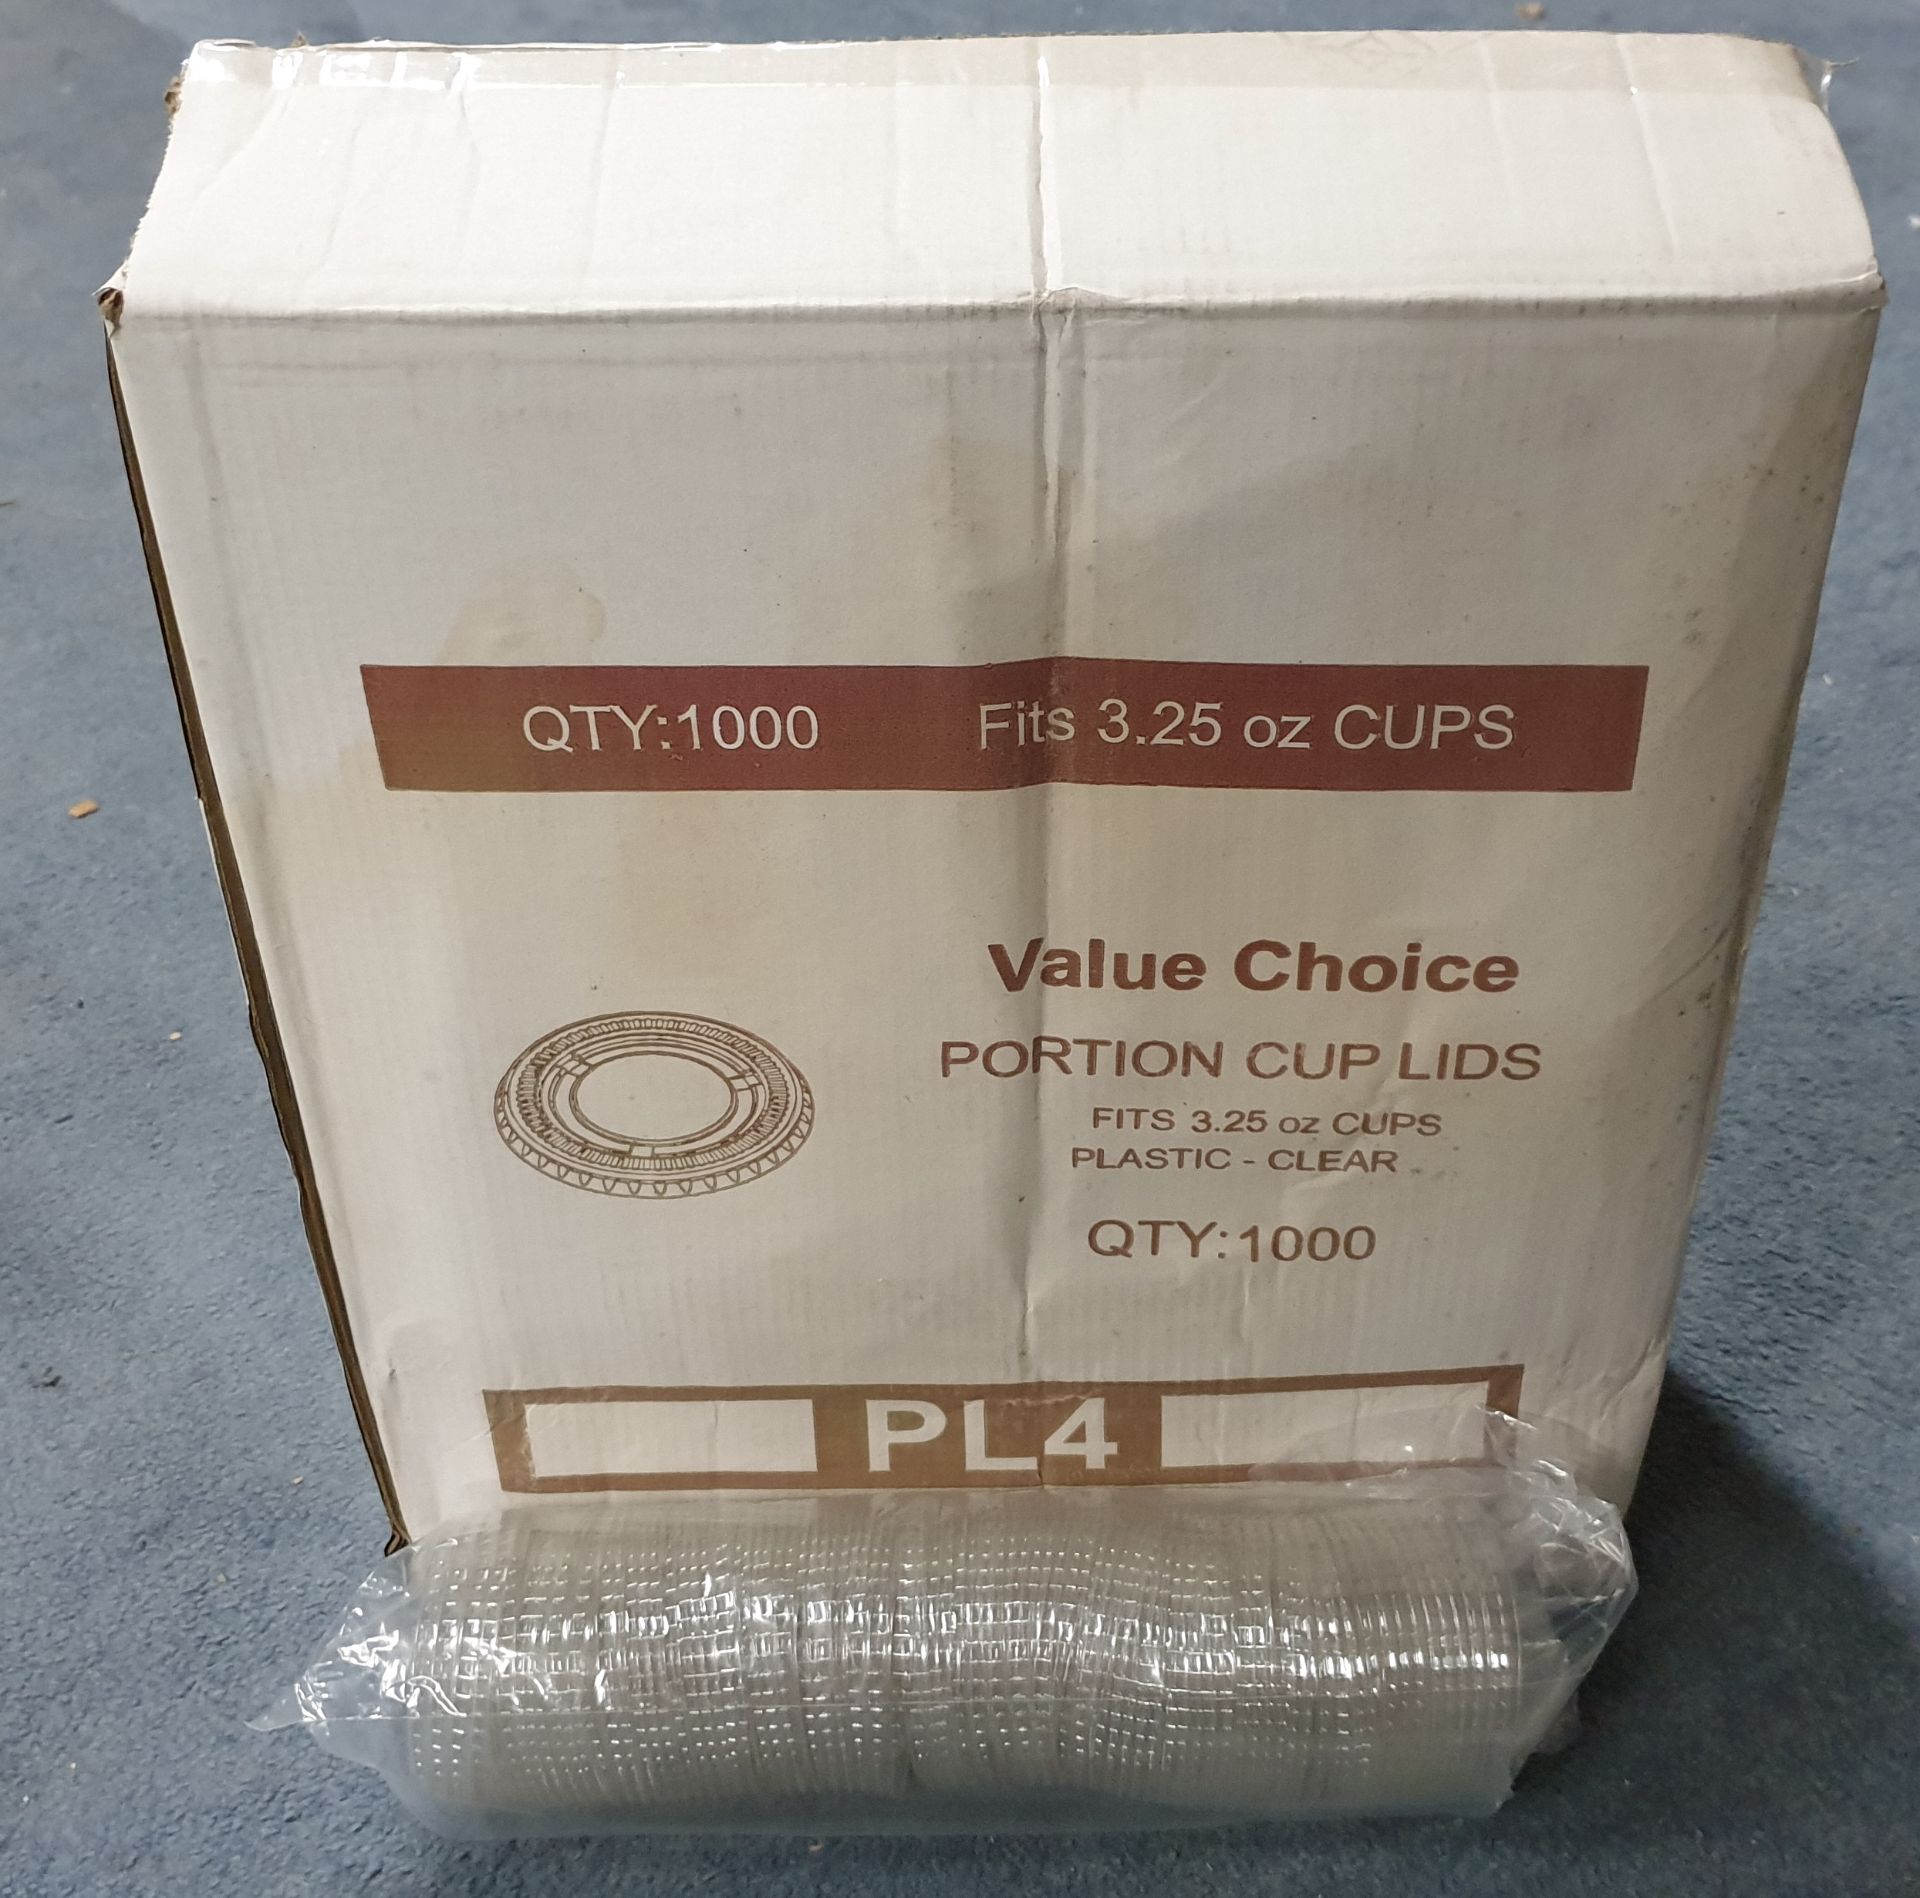 5 x Boxes of Portion Cups/Lids by Value Choice - Image 2 of 2